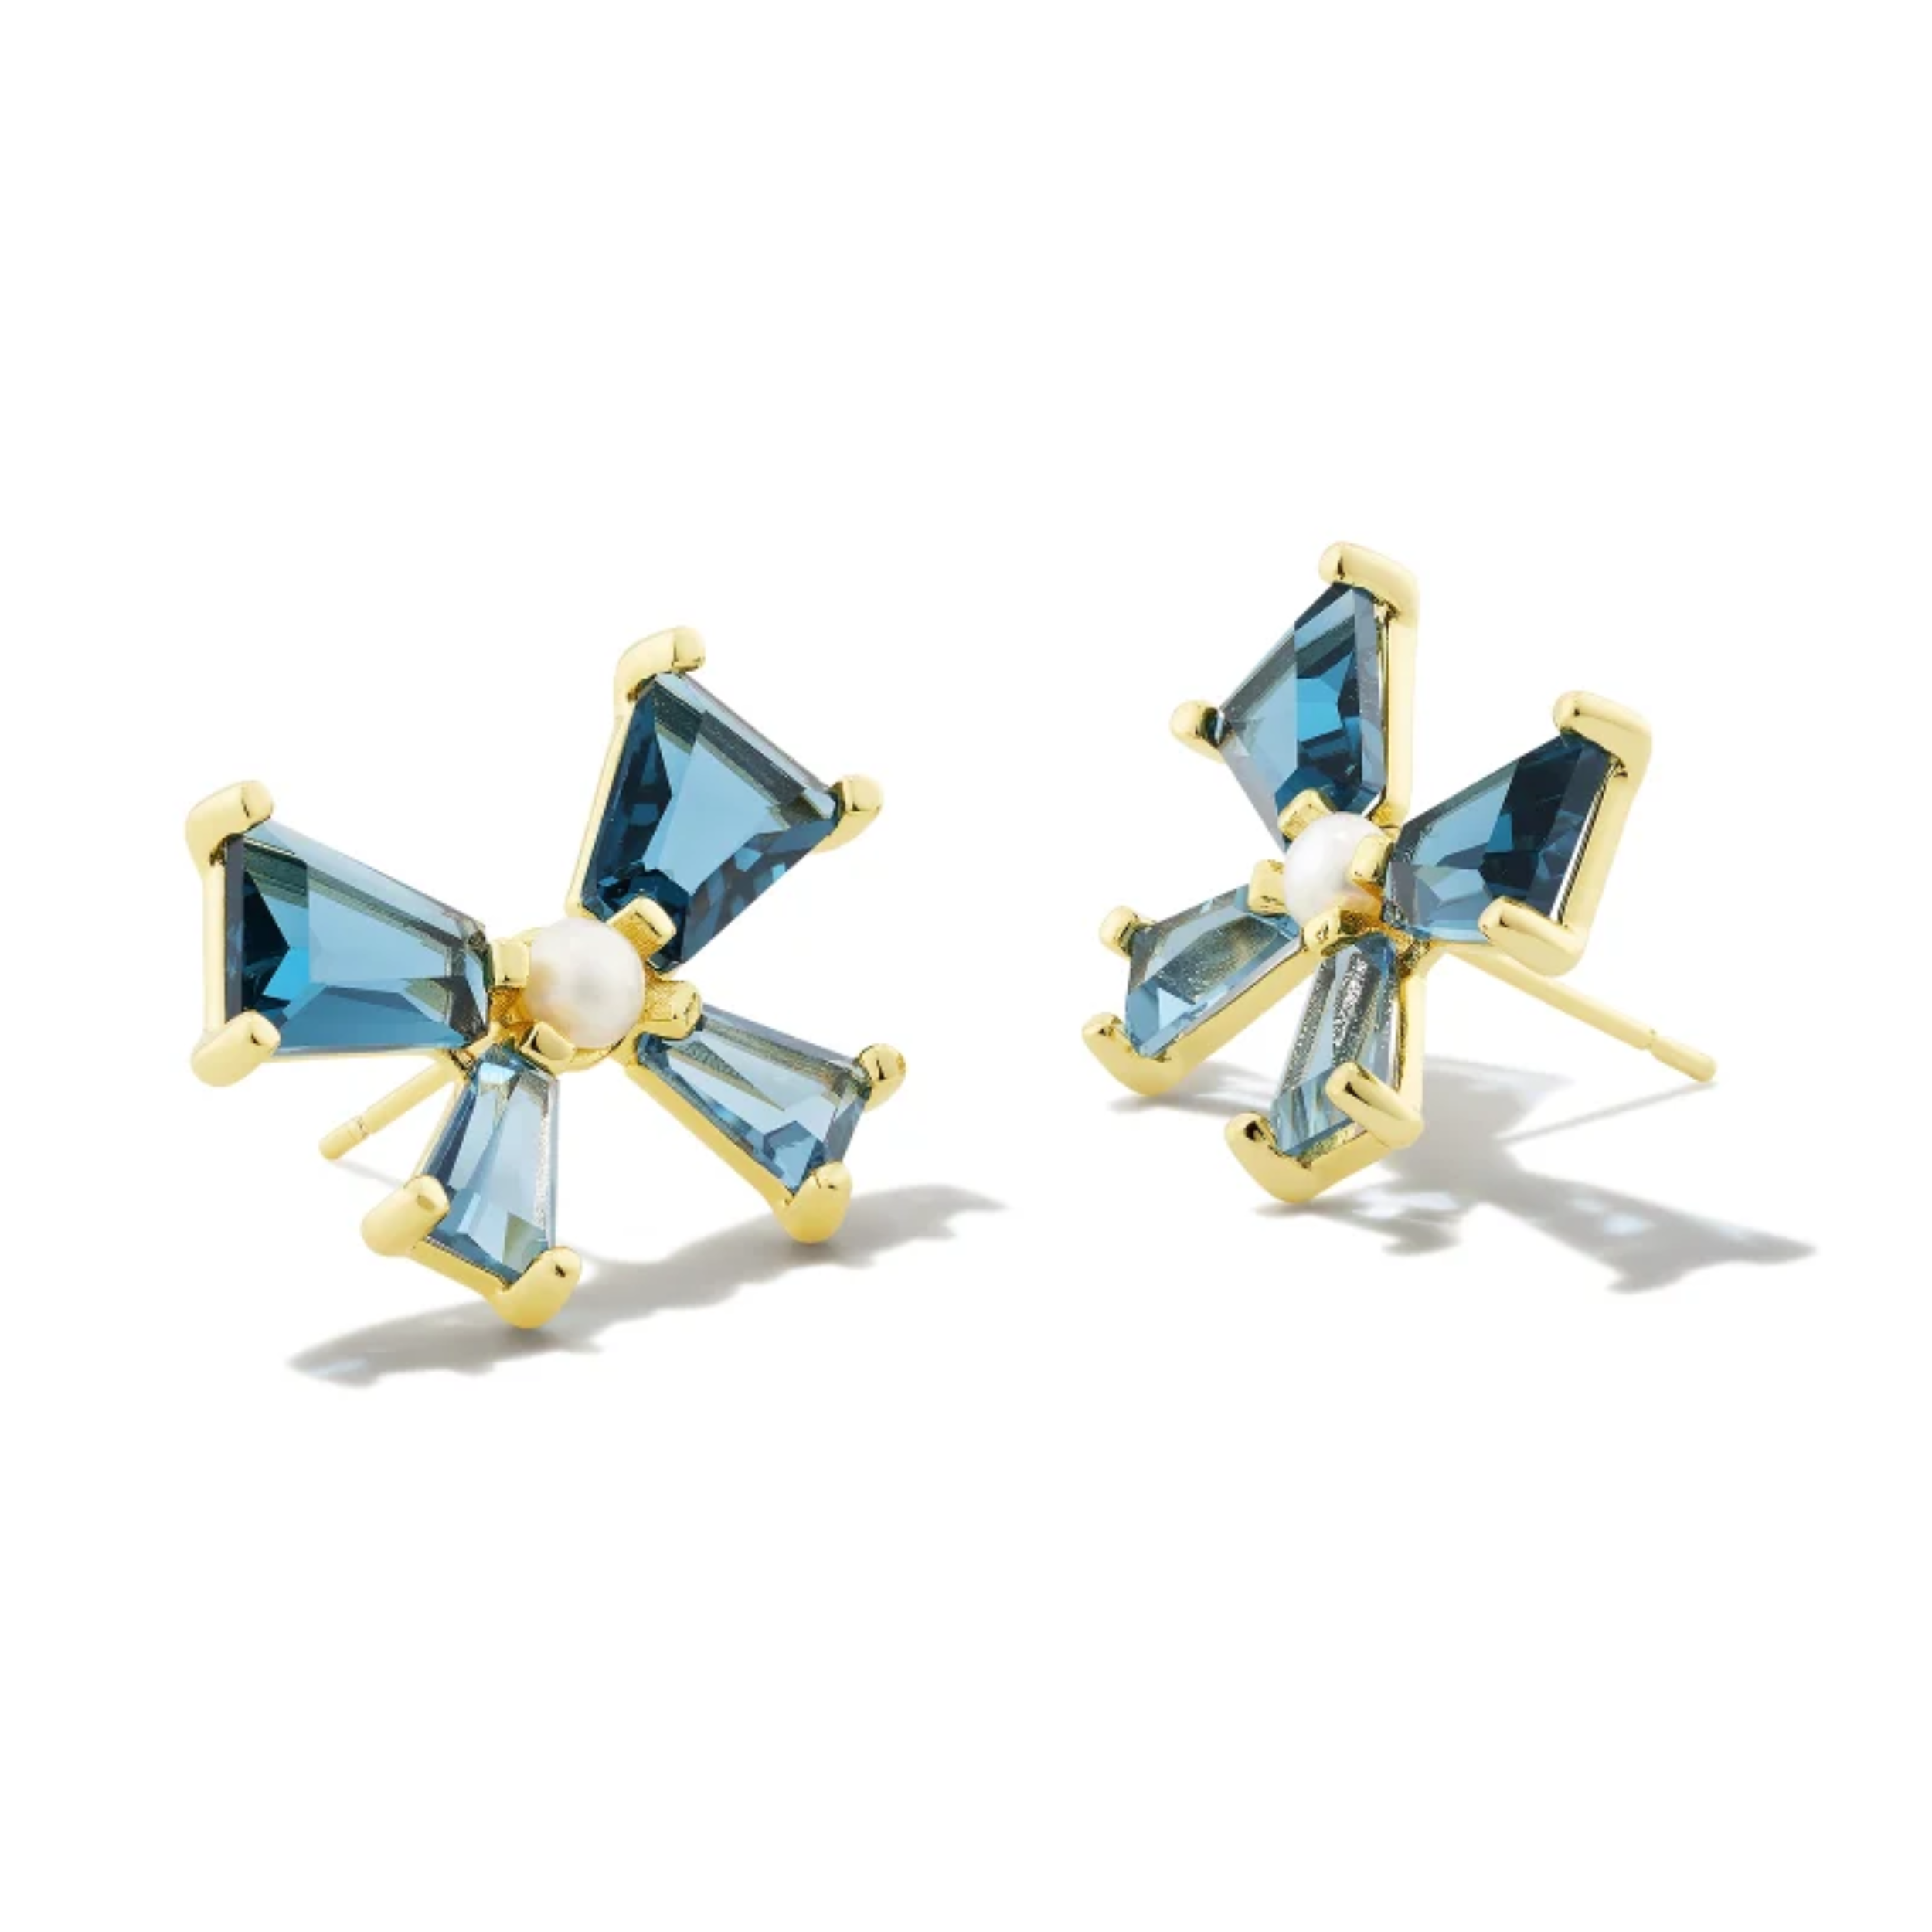 These Blair Bow Gold Stud Earrings in Teal Mix by Kendra Scott are pictured on a white background.